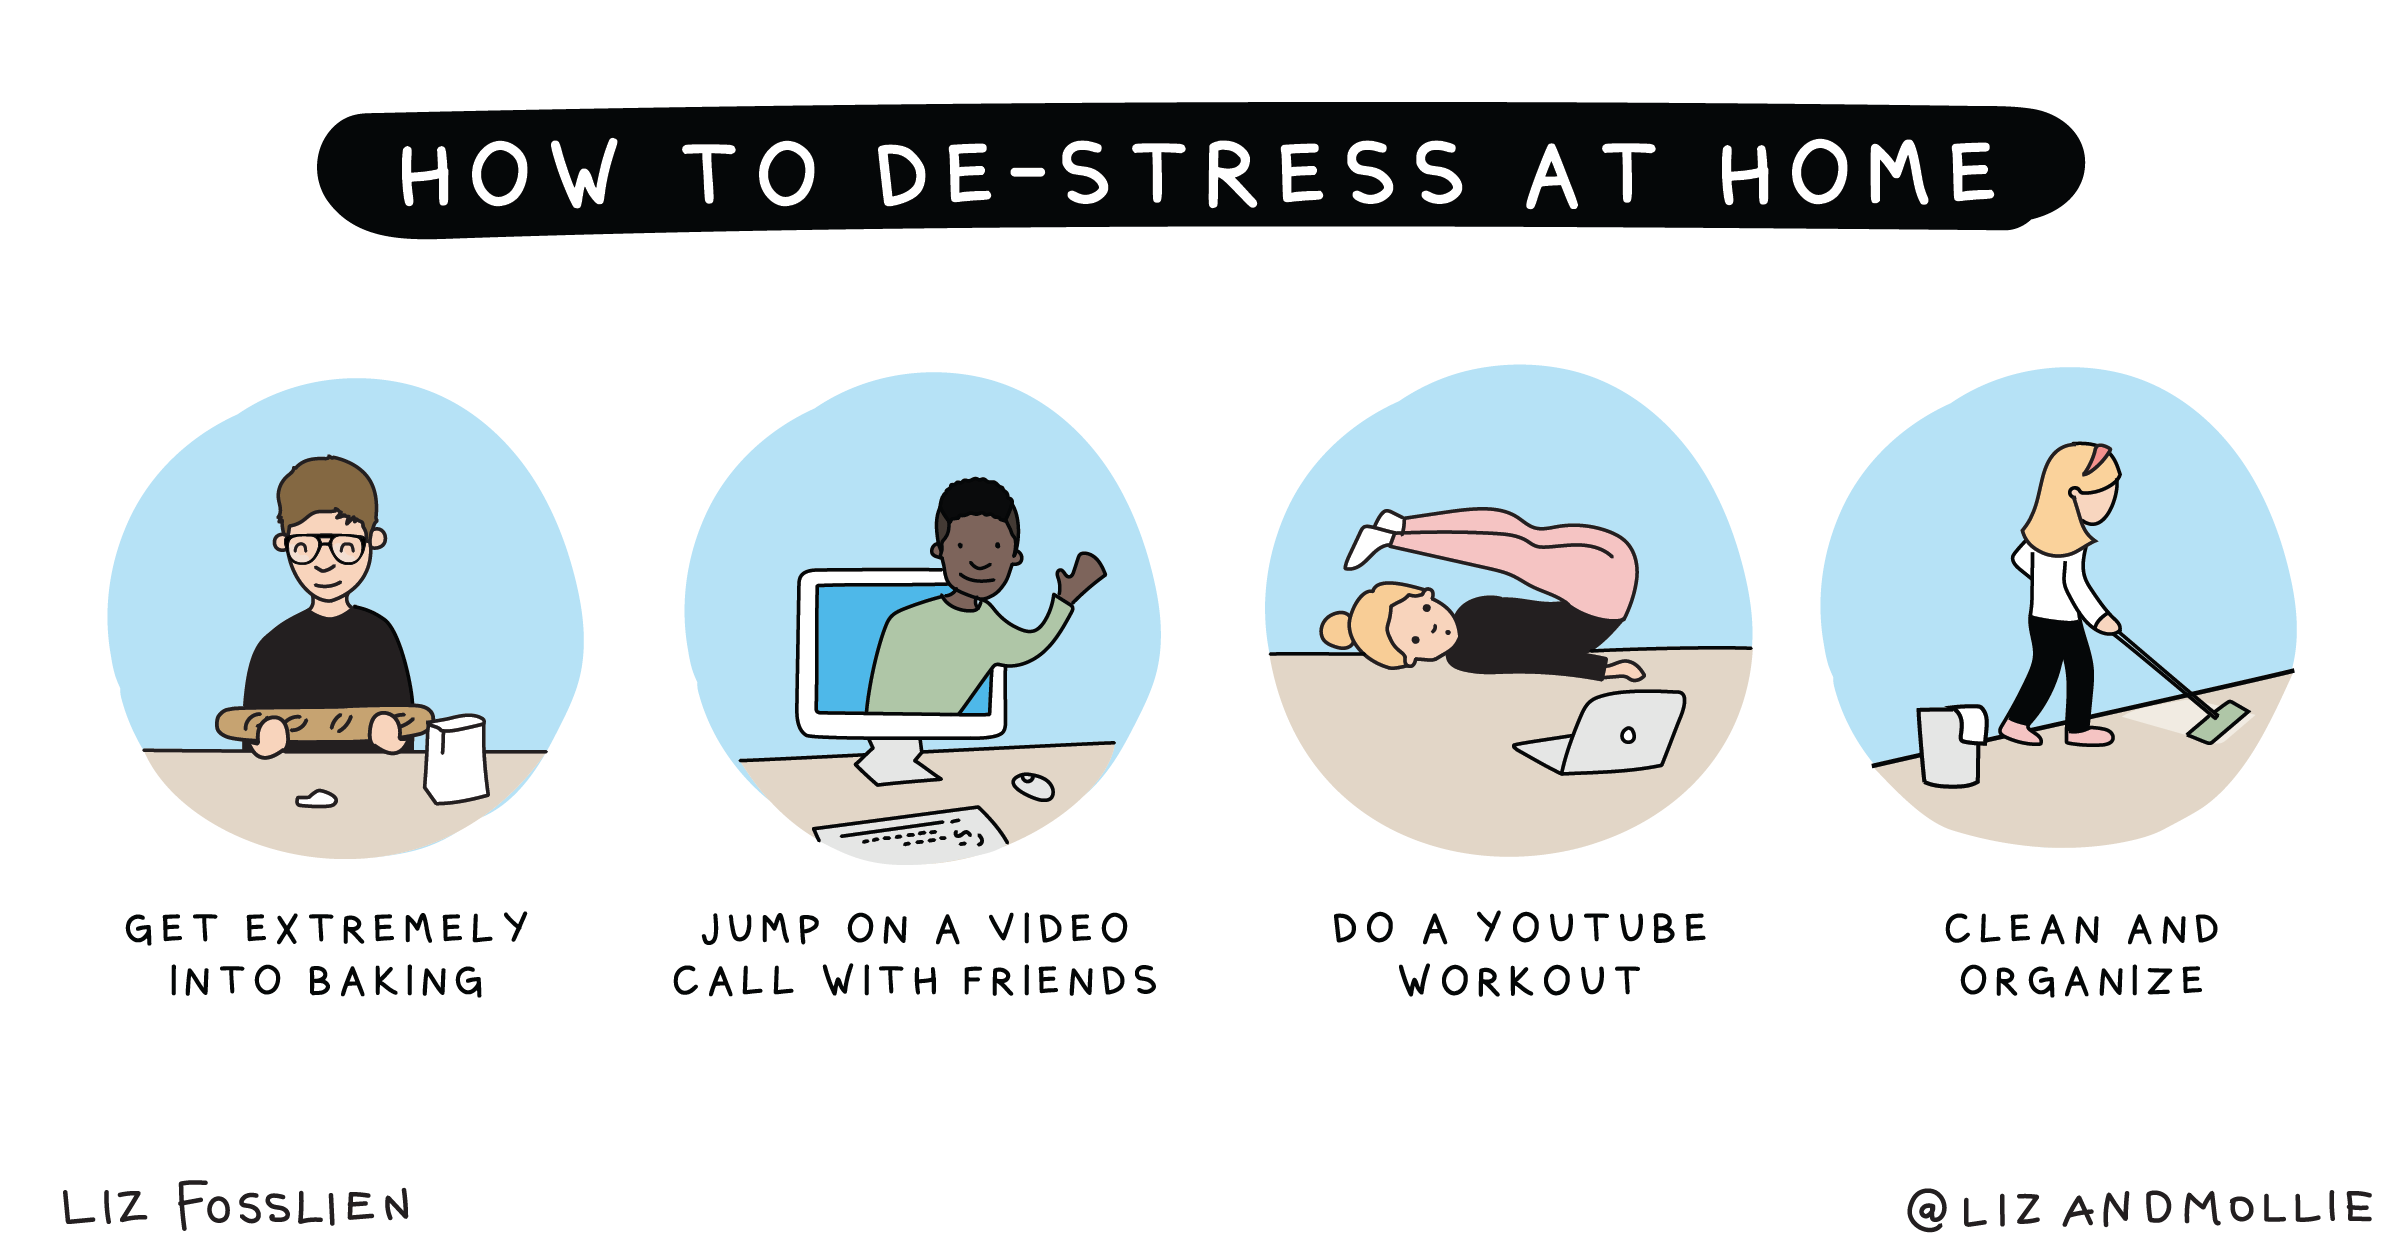 How to destress at home